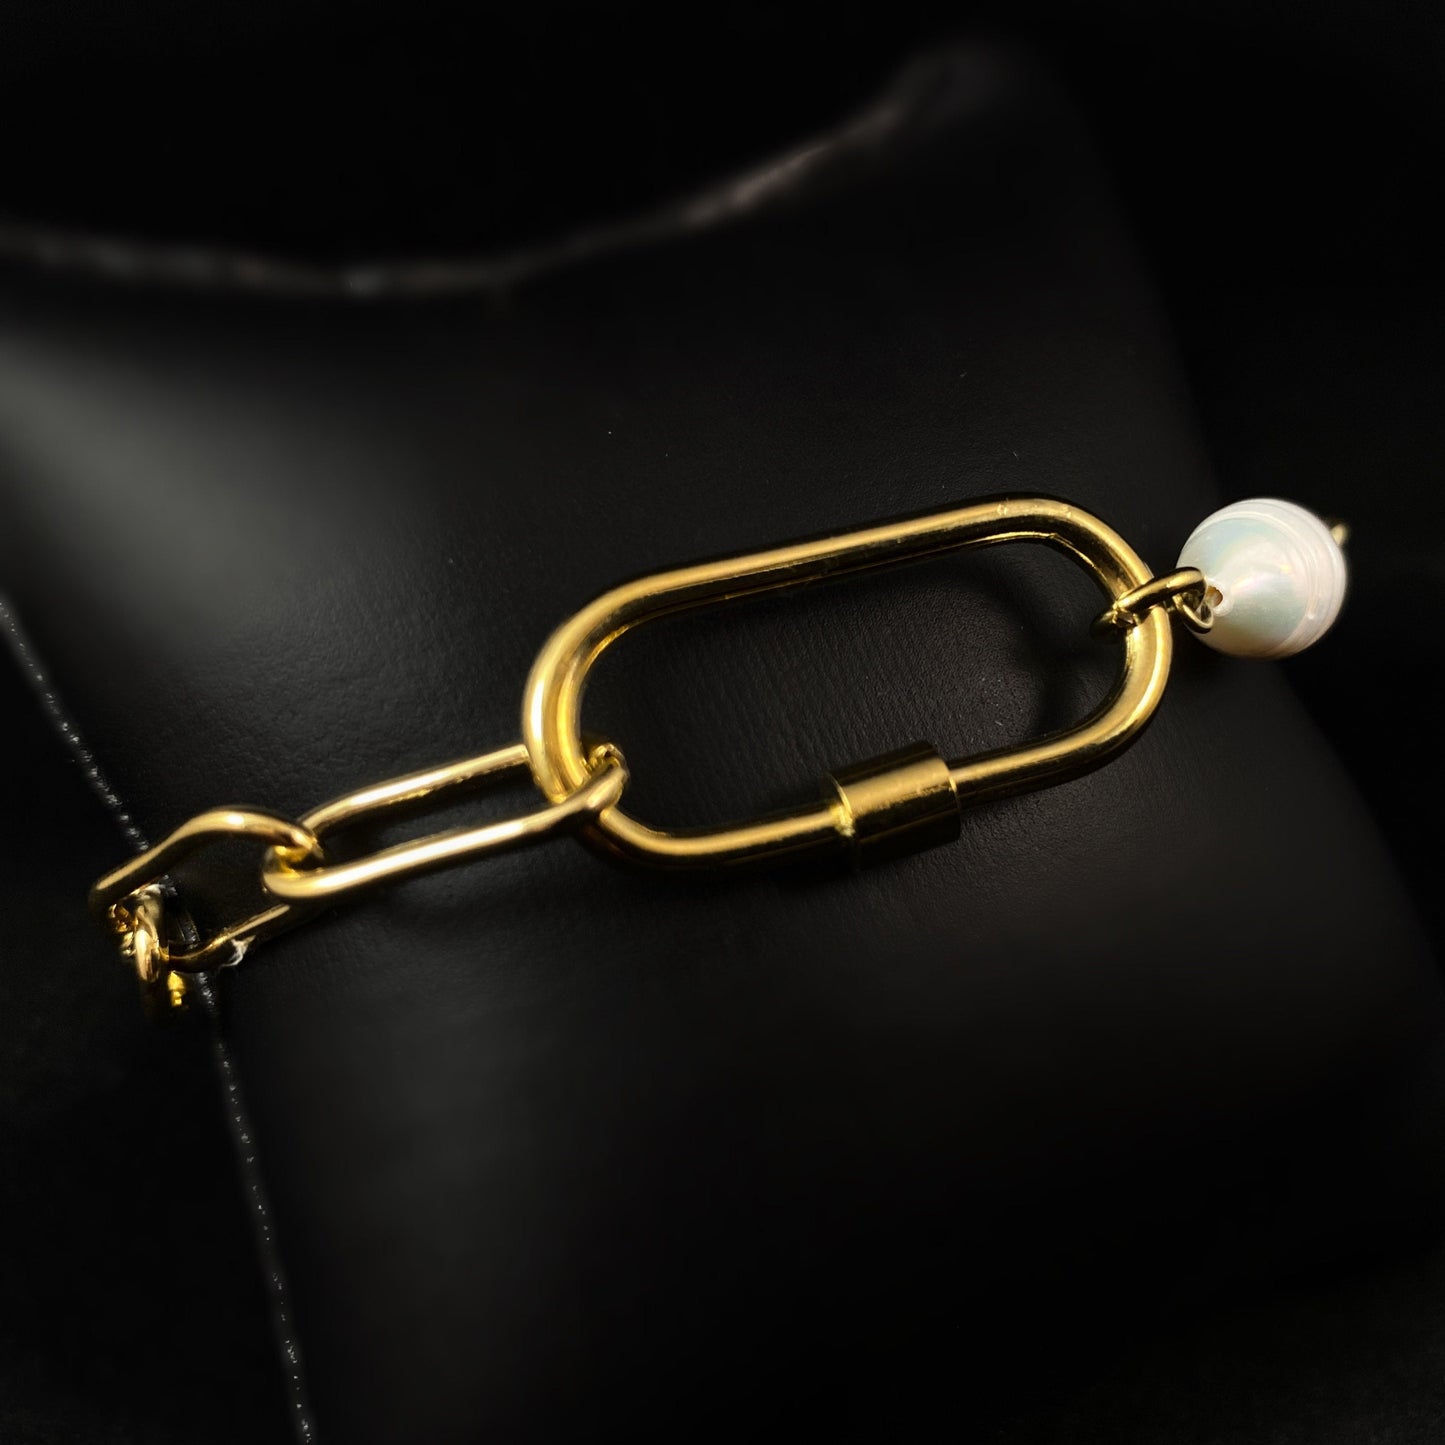 White Pearl Bracelet with Chunky Gold Chain and Decorative Chain Link Accent